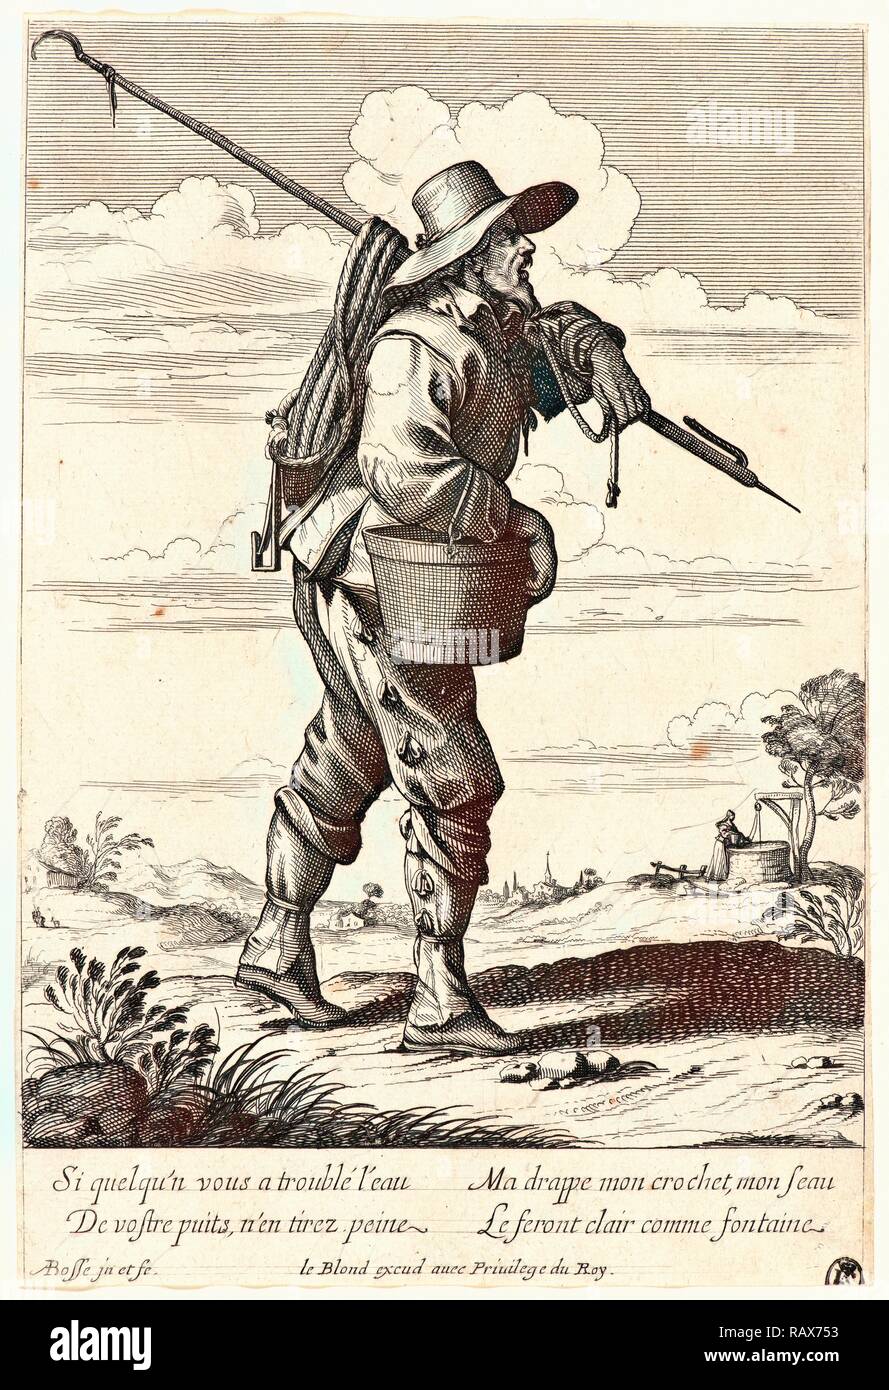 Abraham Bosse (French, 1602 - 1676). Le Nettoyeur de Puits, 17th century.  Etching. . Reimagined by Gibon. Classic art reimagined Stock Photo - Alamy